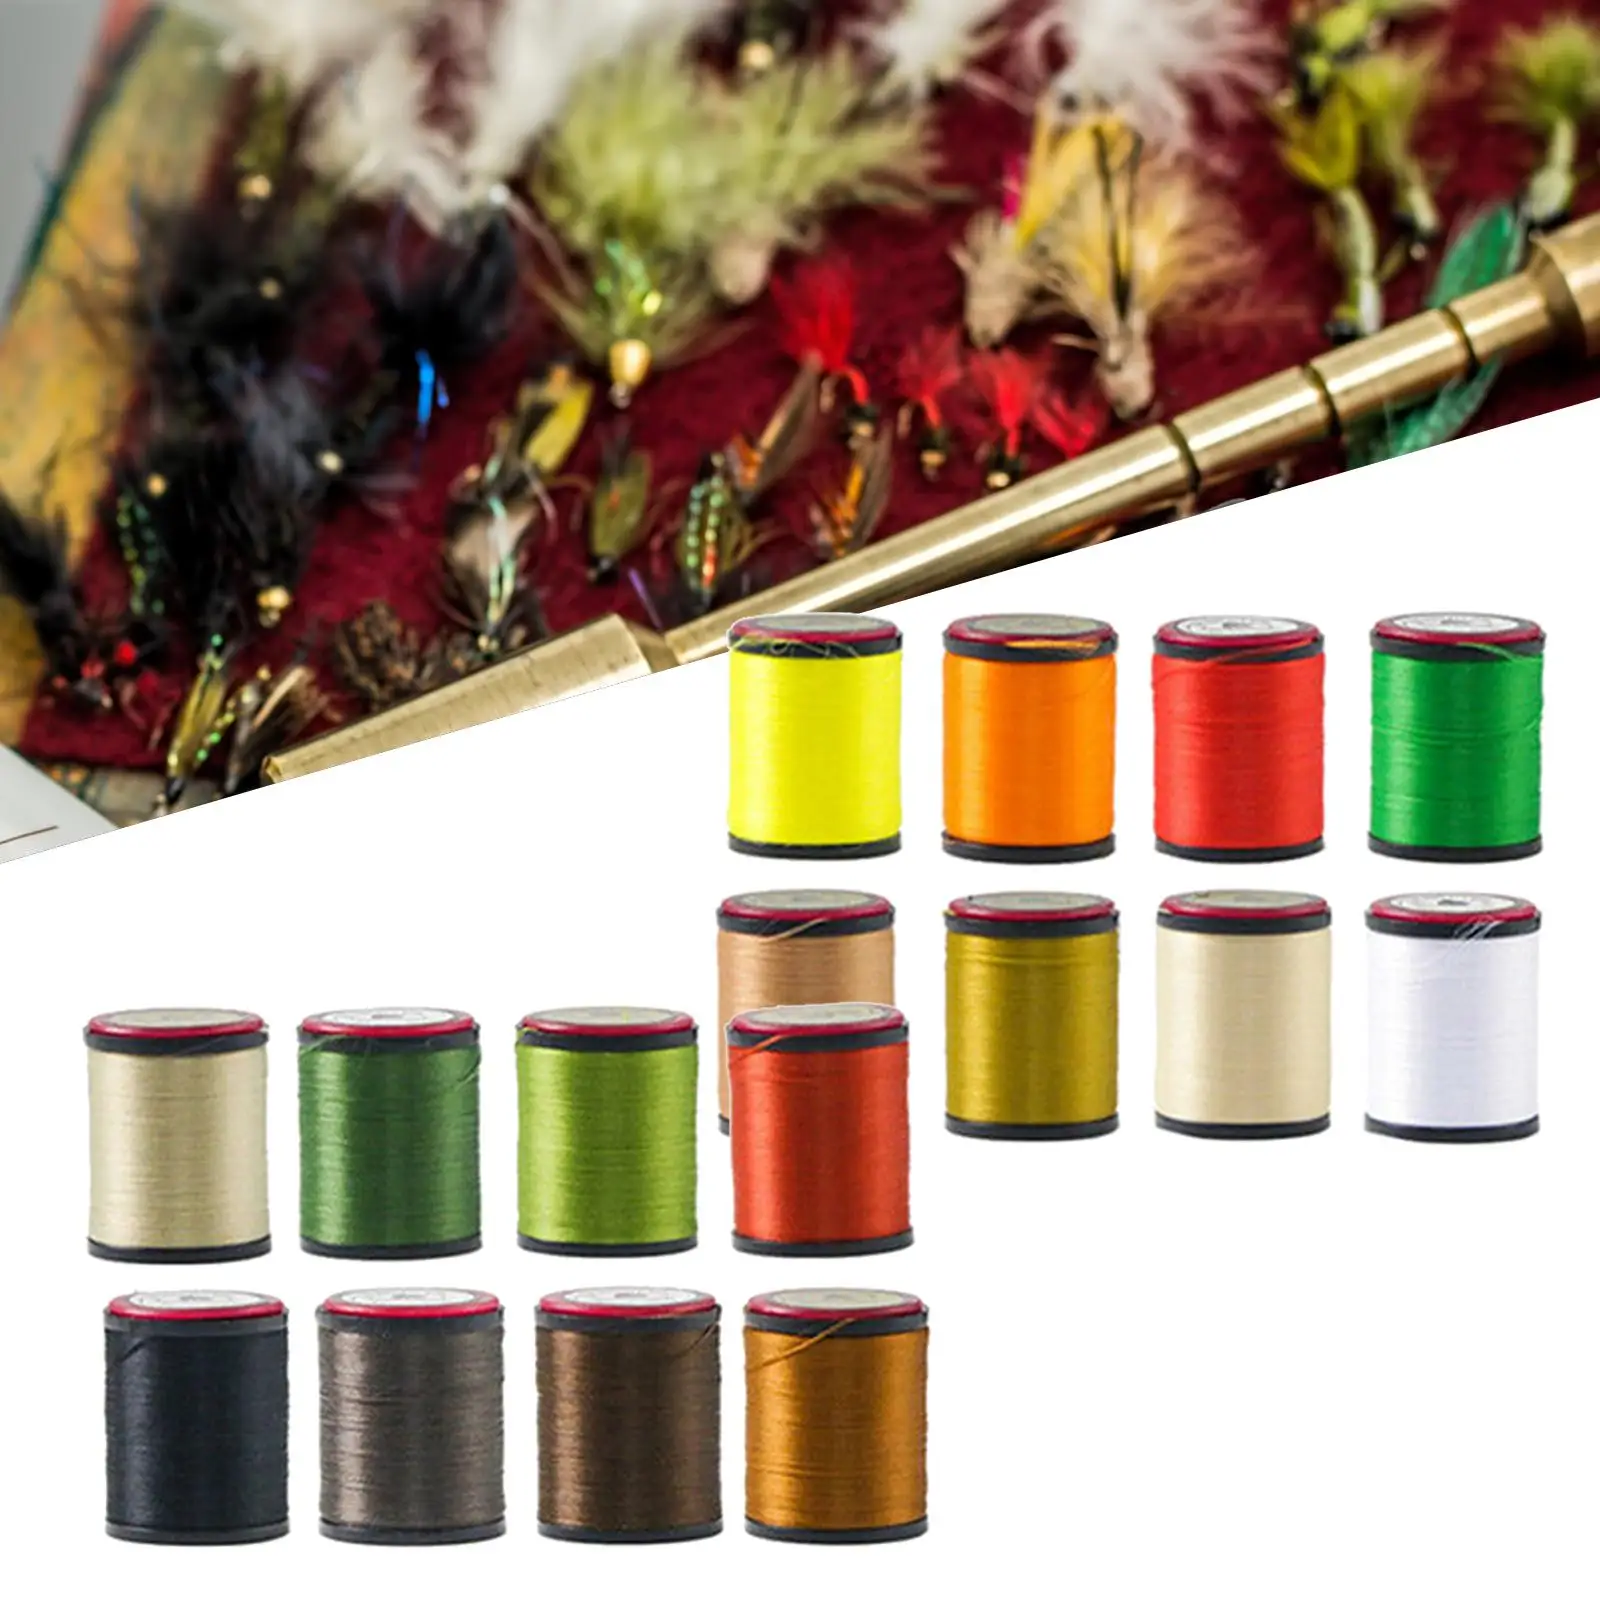 8Pcs Lightly Waxed Fly Tying Thread Kit High Strength Fly Fishing Materials